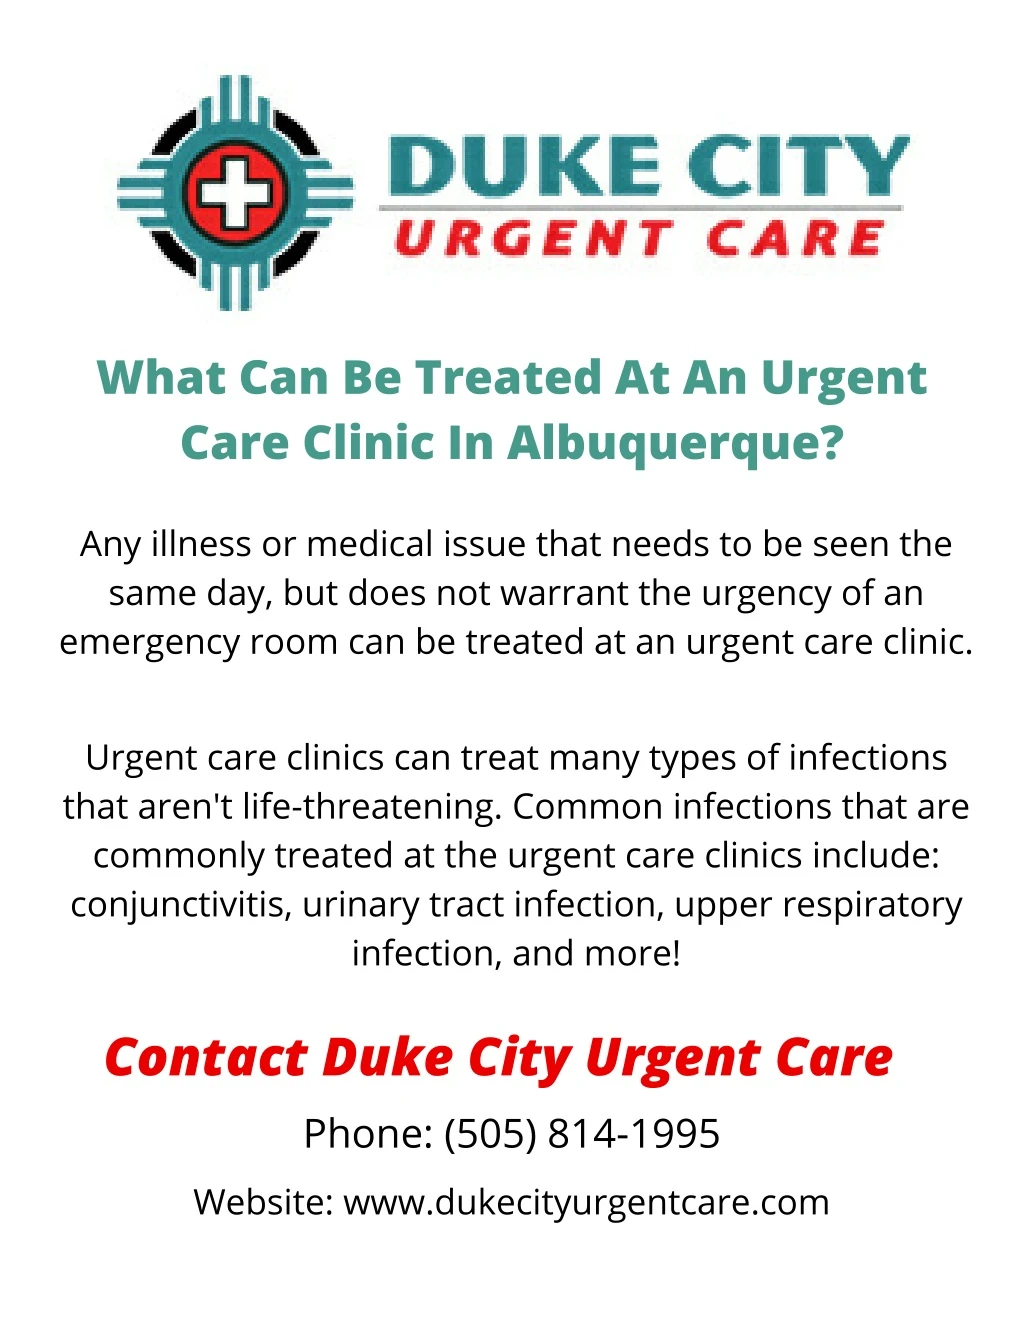 what can be treated at an urgent care clinic